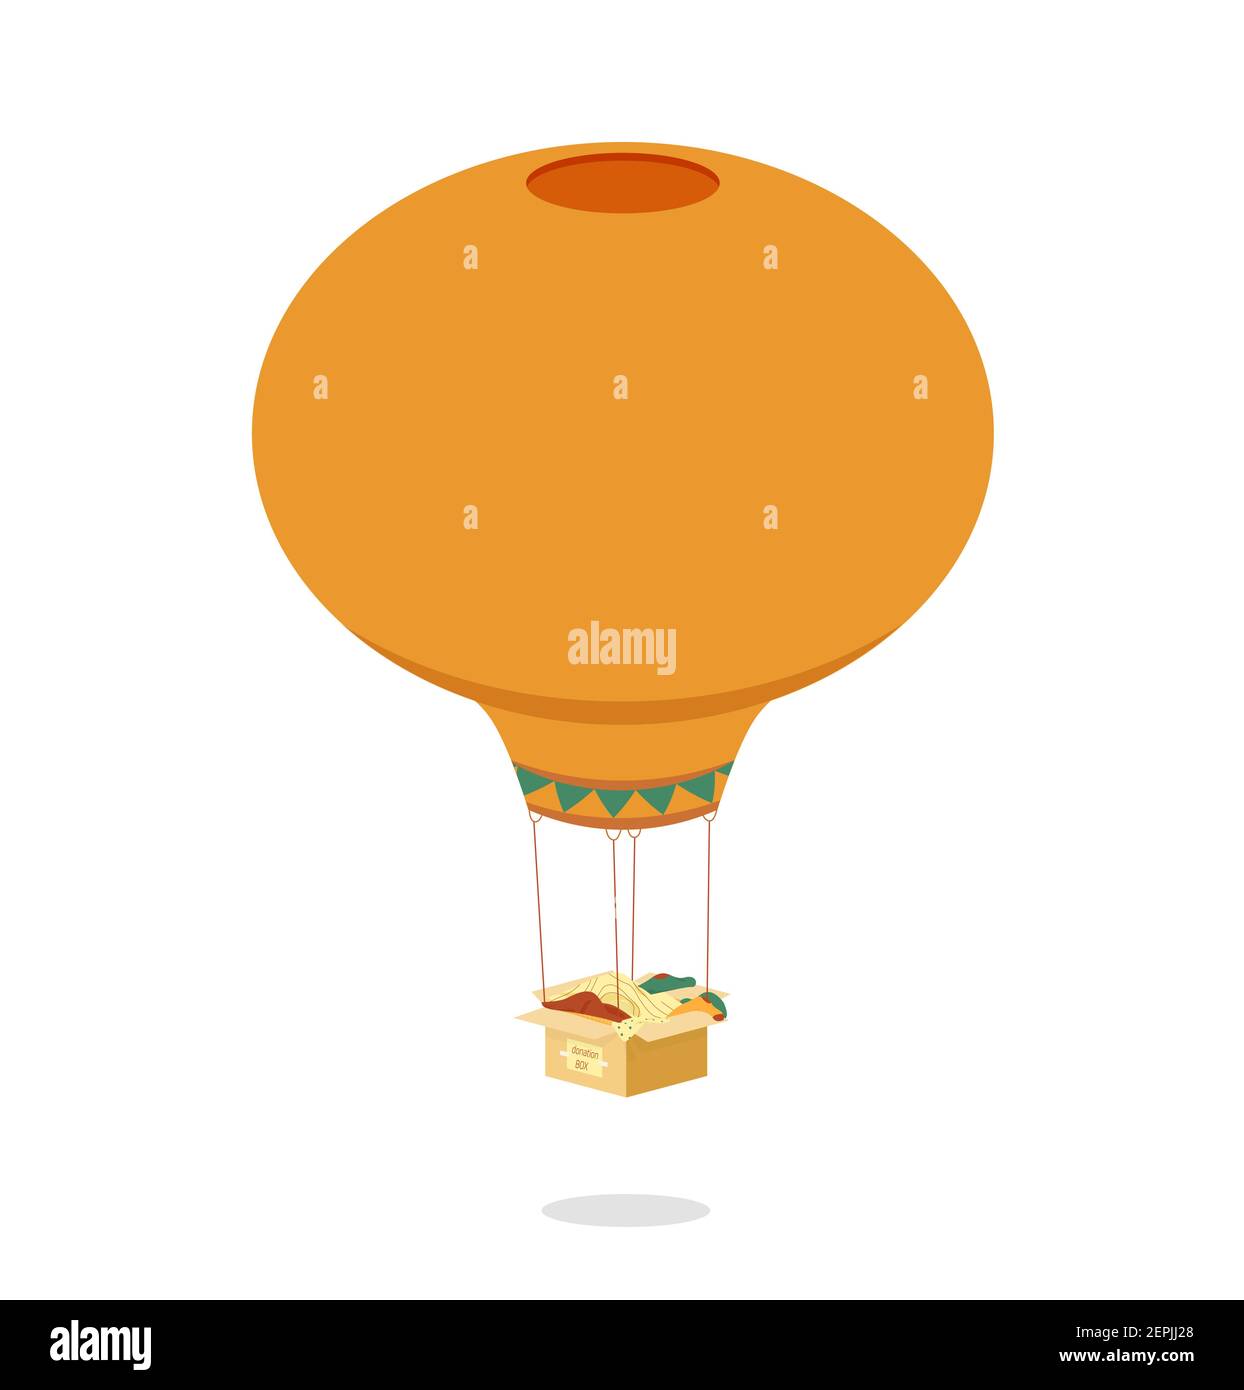 Balloon attached to box. Orange air travel vehicle carry open box creative travel in free vector flight. Stock Vector